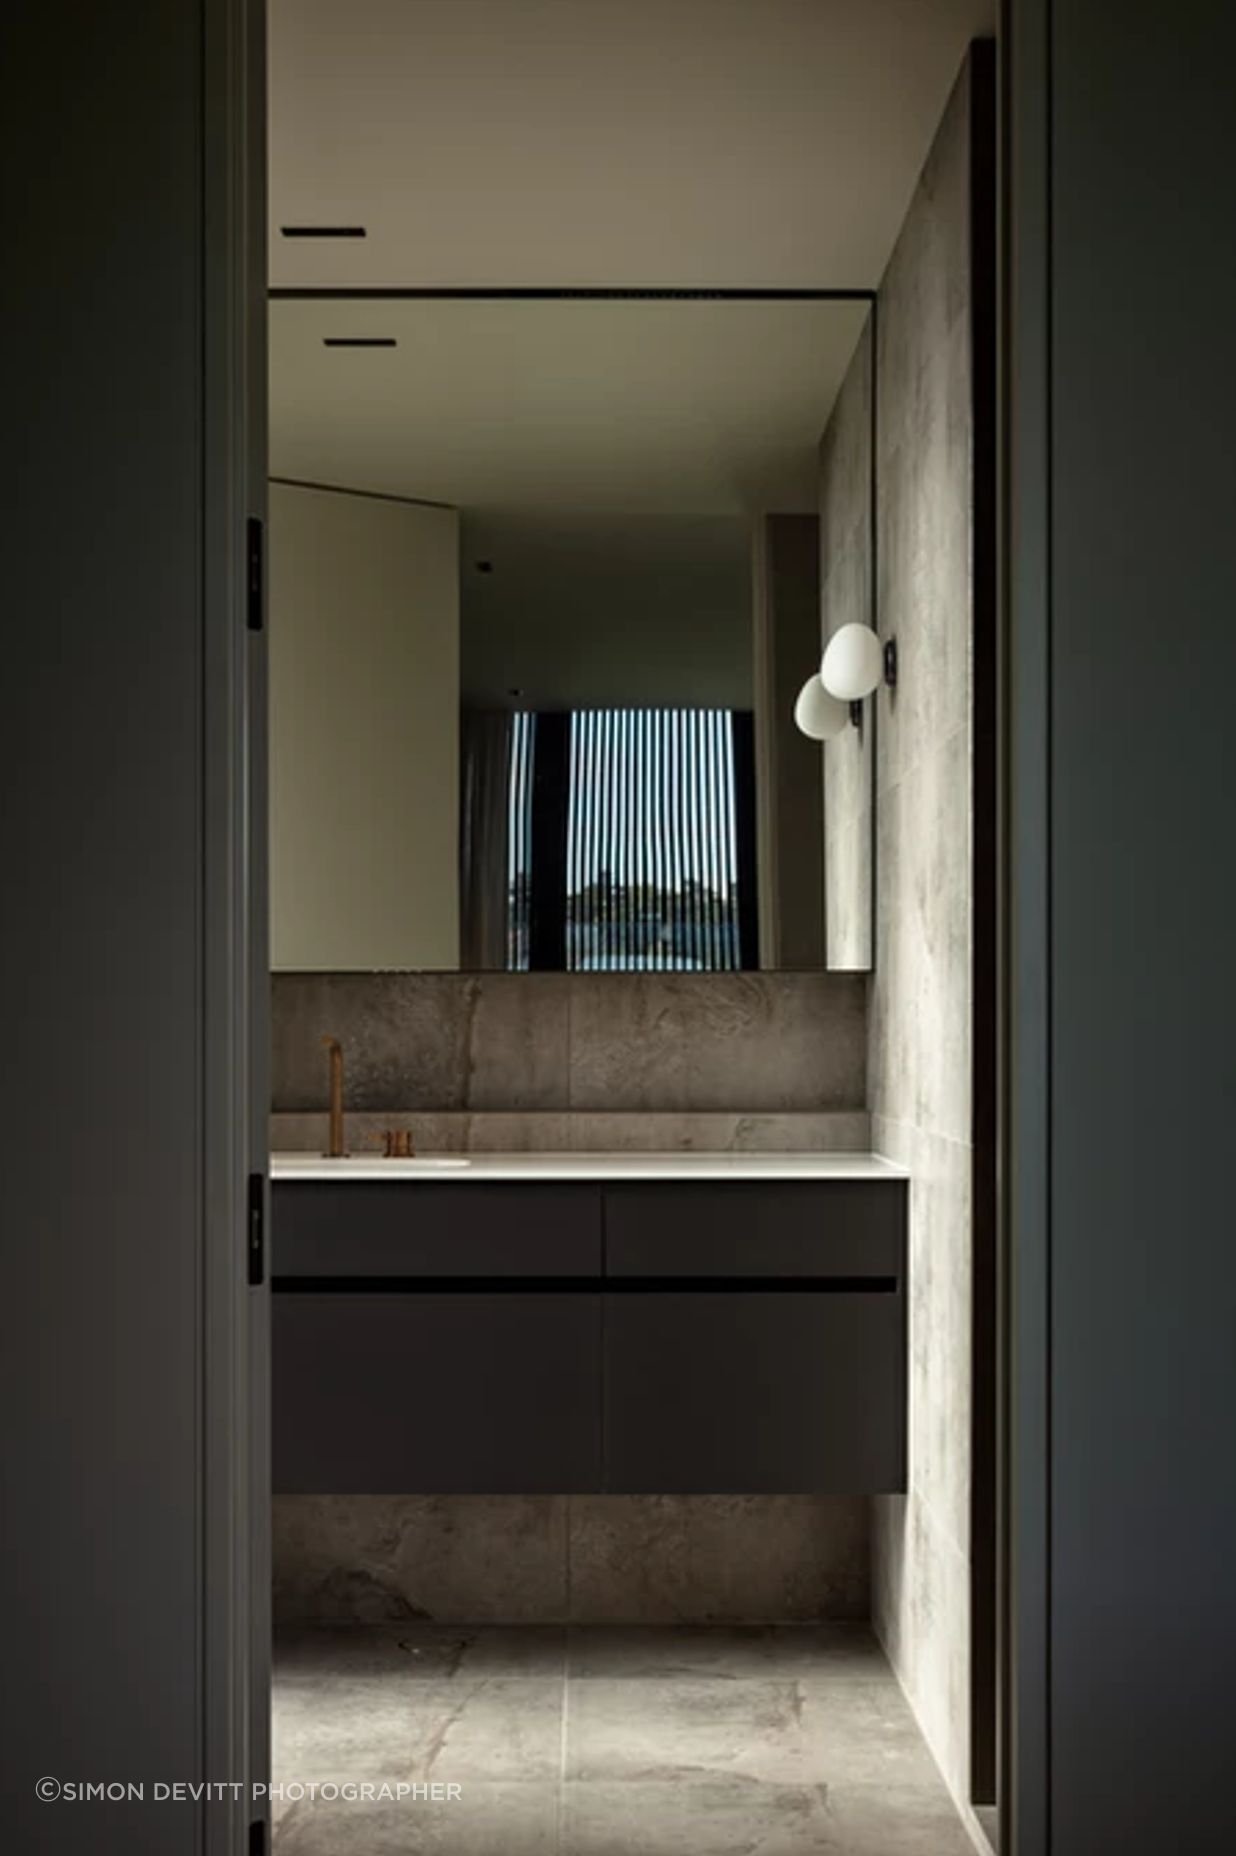 “We oriented the vanities in the ensuites so that the mirrors reflected the view behind,” says Evelyn. The lighting is from ECC.